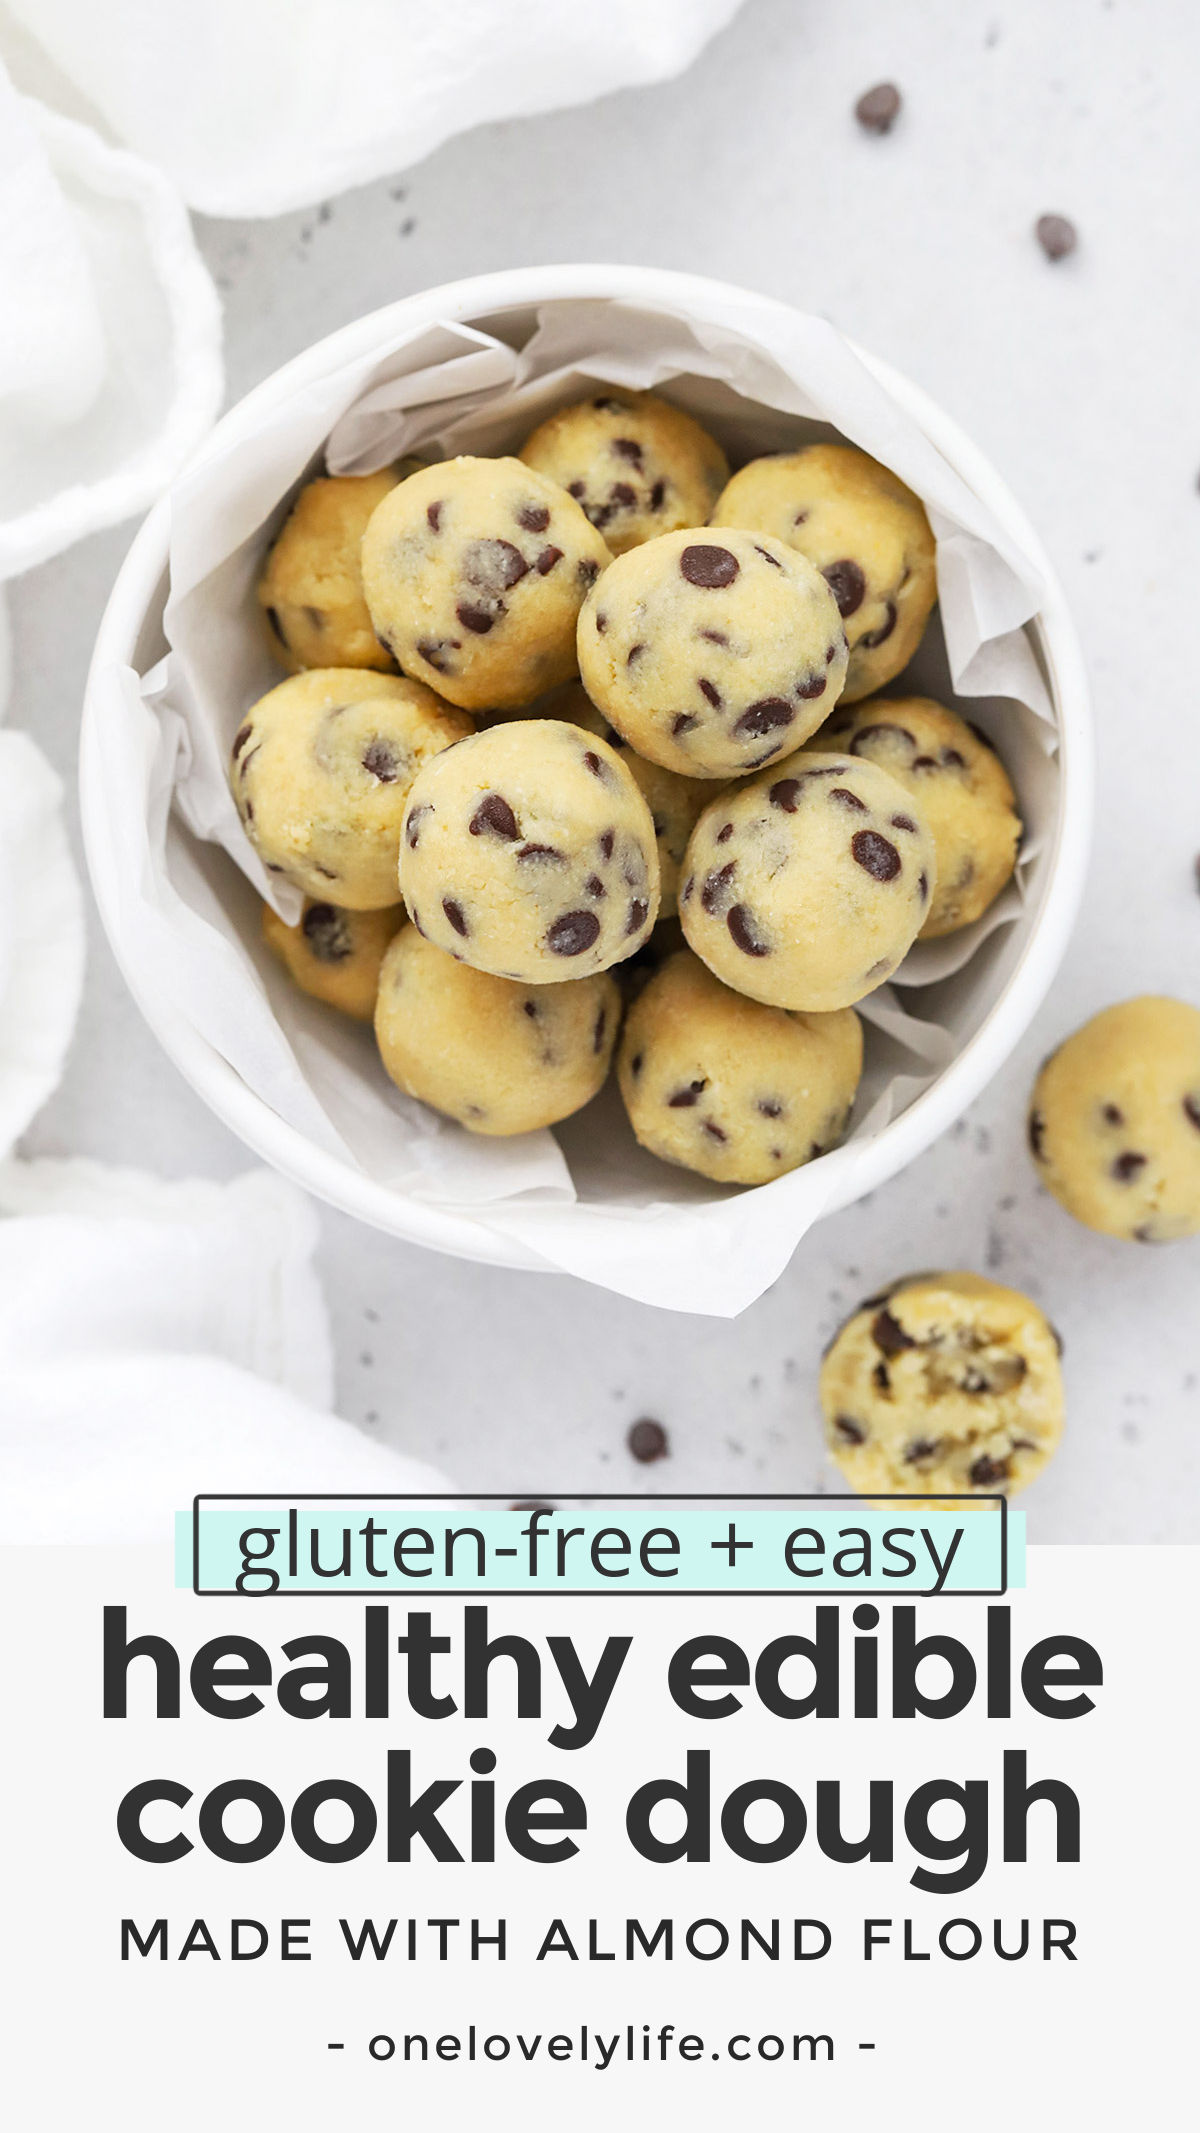 Healthy edible cookie dough? YES PLEASE! This almond flour cookie dough recipe is easy + delicious. The perfect no-bake treat to keep on hand! (Gluten-free, paleo, vegan-friendly) // Almond Flour Cookie Dough // Paleo Edible Cookie Dough // Vegan Edible Cookie Dough // Gluten Free Edible Cookie Dough #almondflour #healthytreat #glutenfree #vegetarian #vegan #cookiedough #paleo